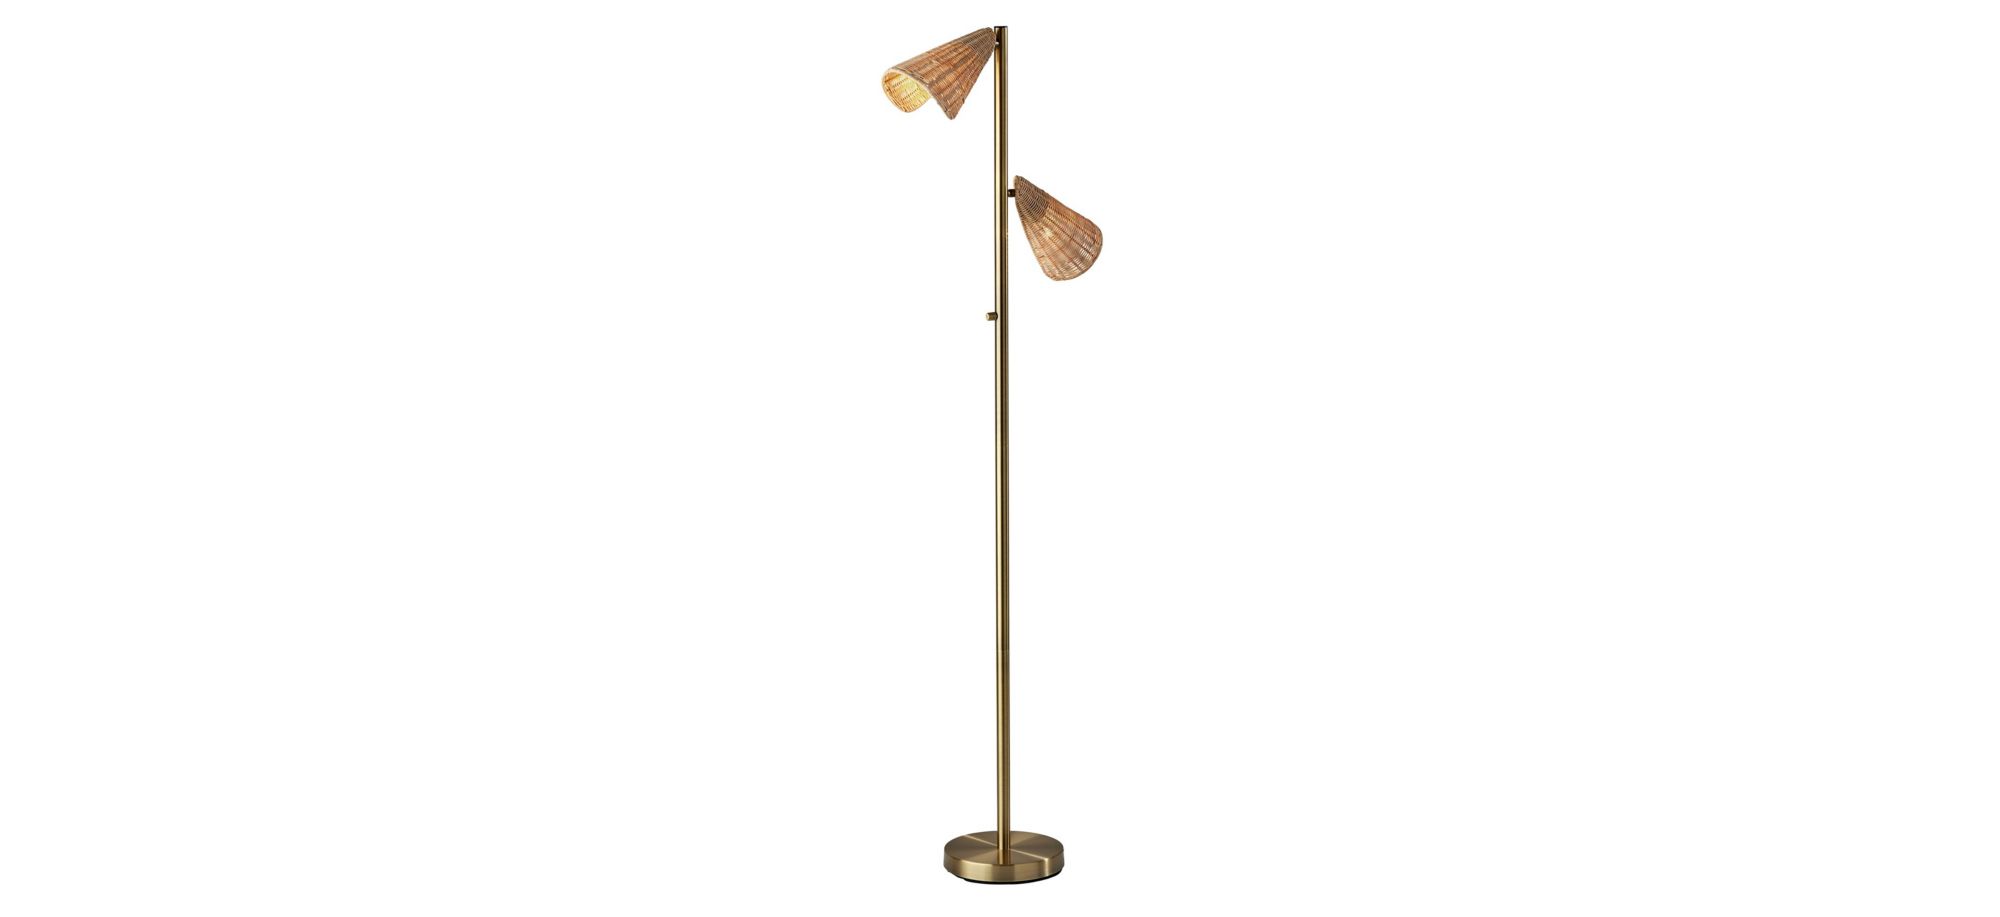 Cove 2-Light Floor Lamp in Antique Brass by Adesso Inc